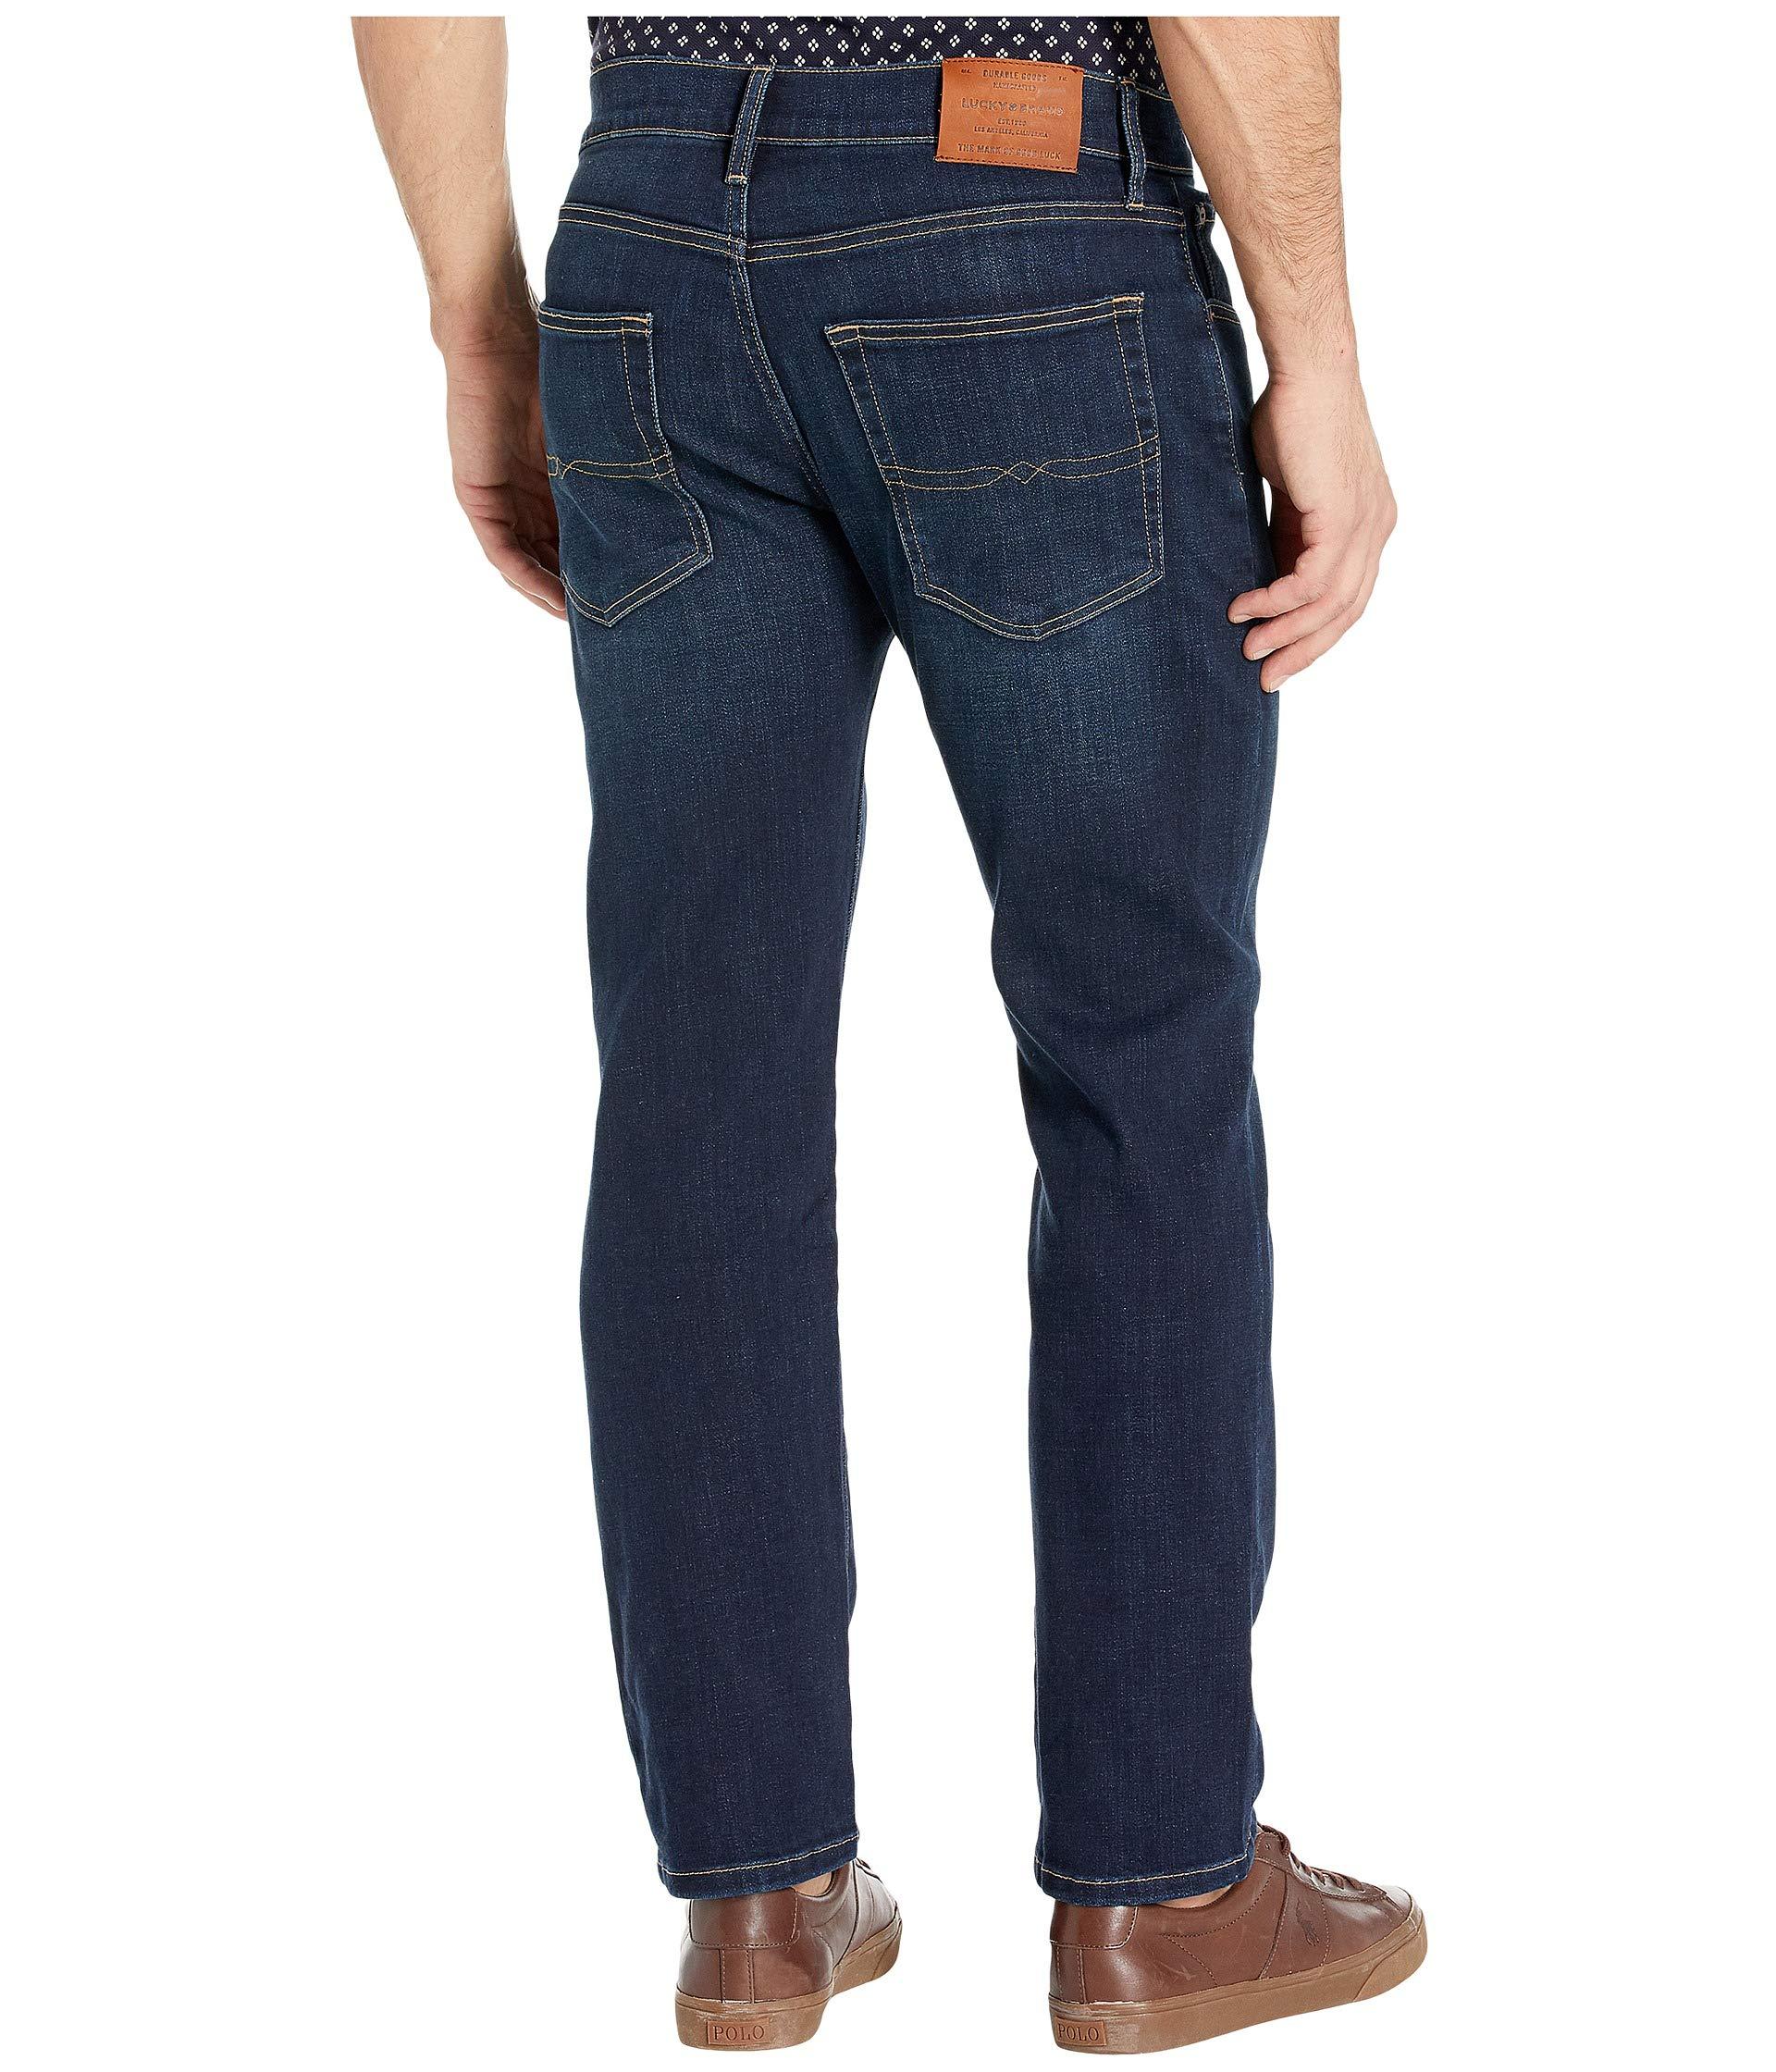 Lucky Brand Denim 223 Straight Jeans In Falcon in Tan (Blue) for Men - Lyst